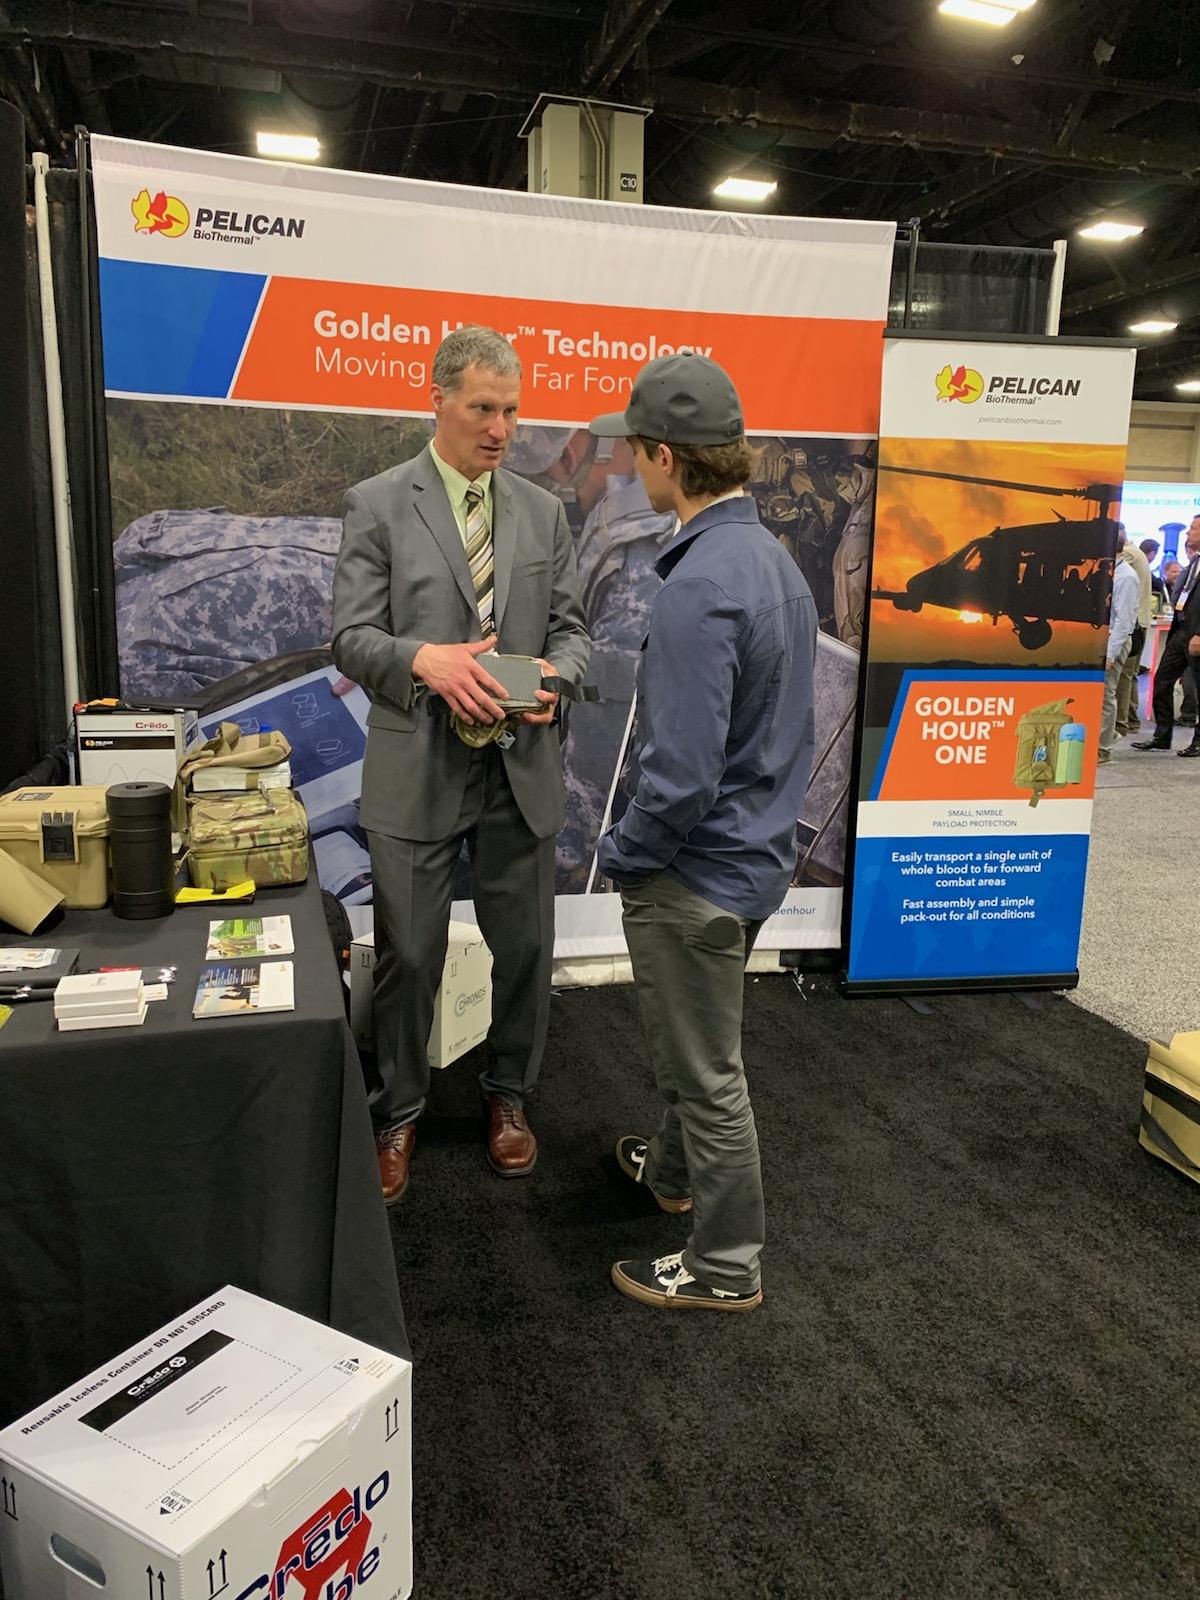 Pelican BioThermal introduces new Golden Hour One at SOMSA 2019 in Charlotte, North Carolina